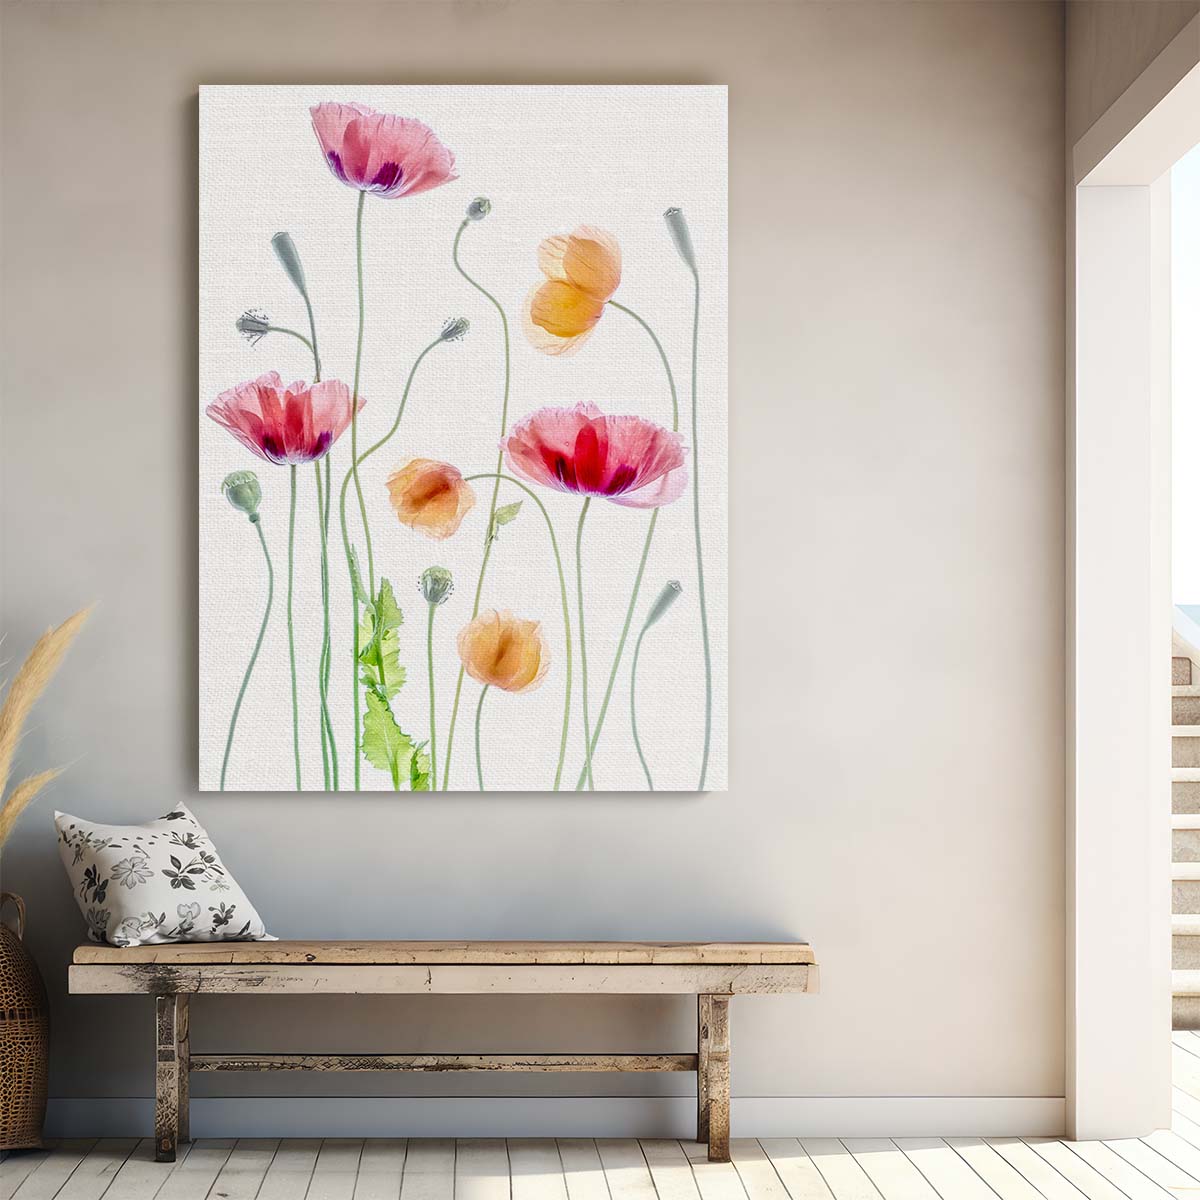 Colorful Summer Poppies Macro Photography by Mandy Disher by Luxuriance Designs, made in USA